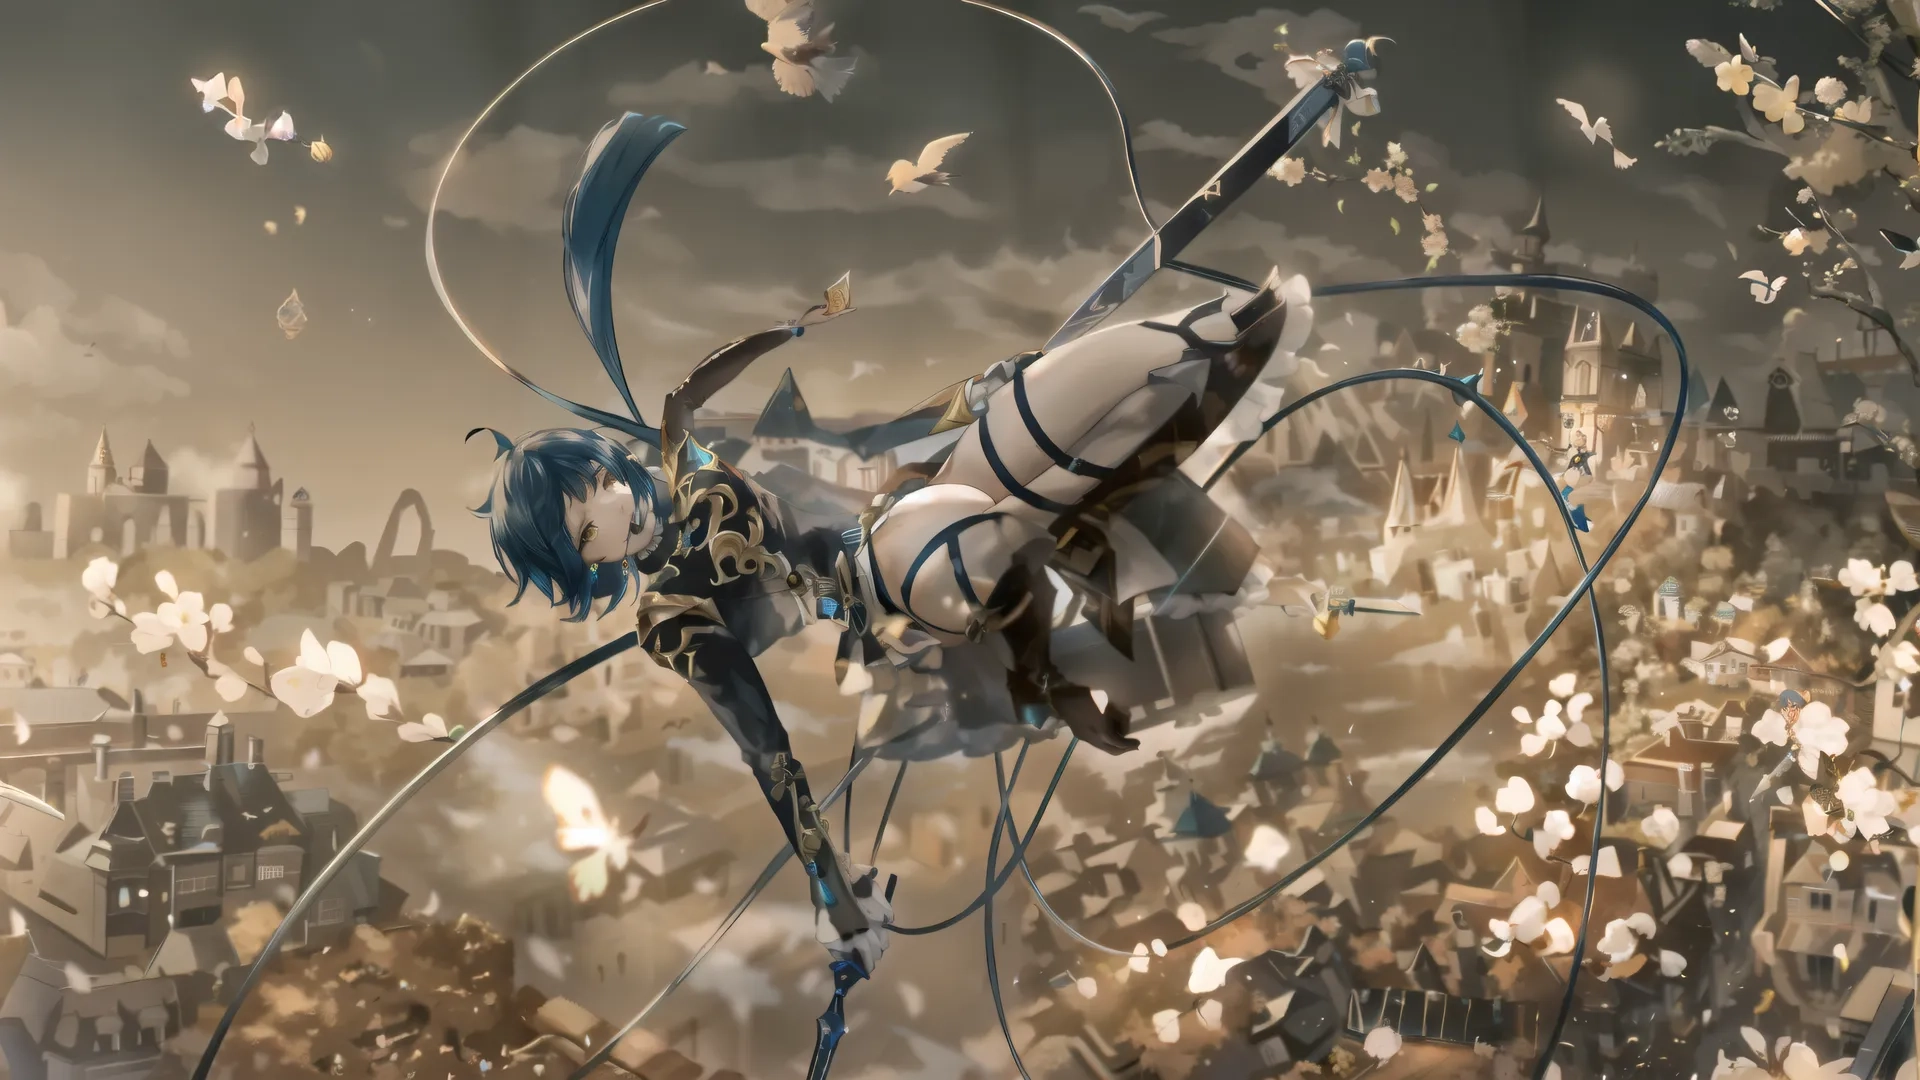 blue - eyed anime girl and a giant knife amongst flying birds, a cityscape in the background and a bunch of birdy clouds
